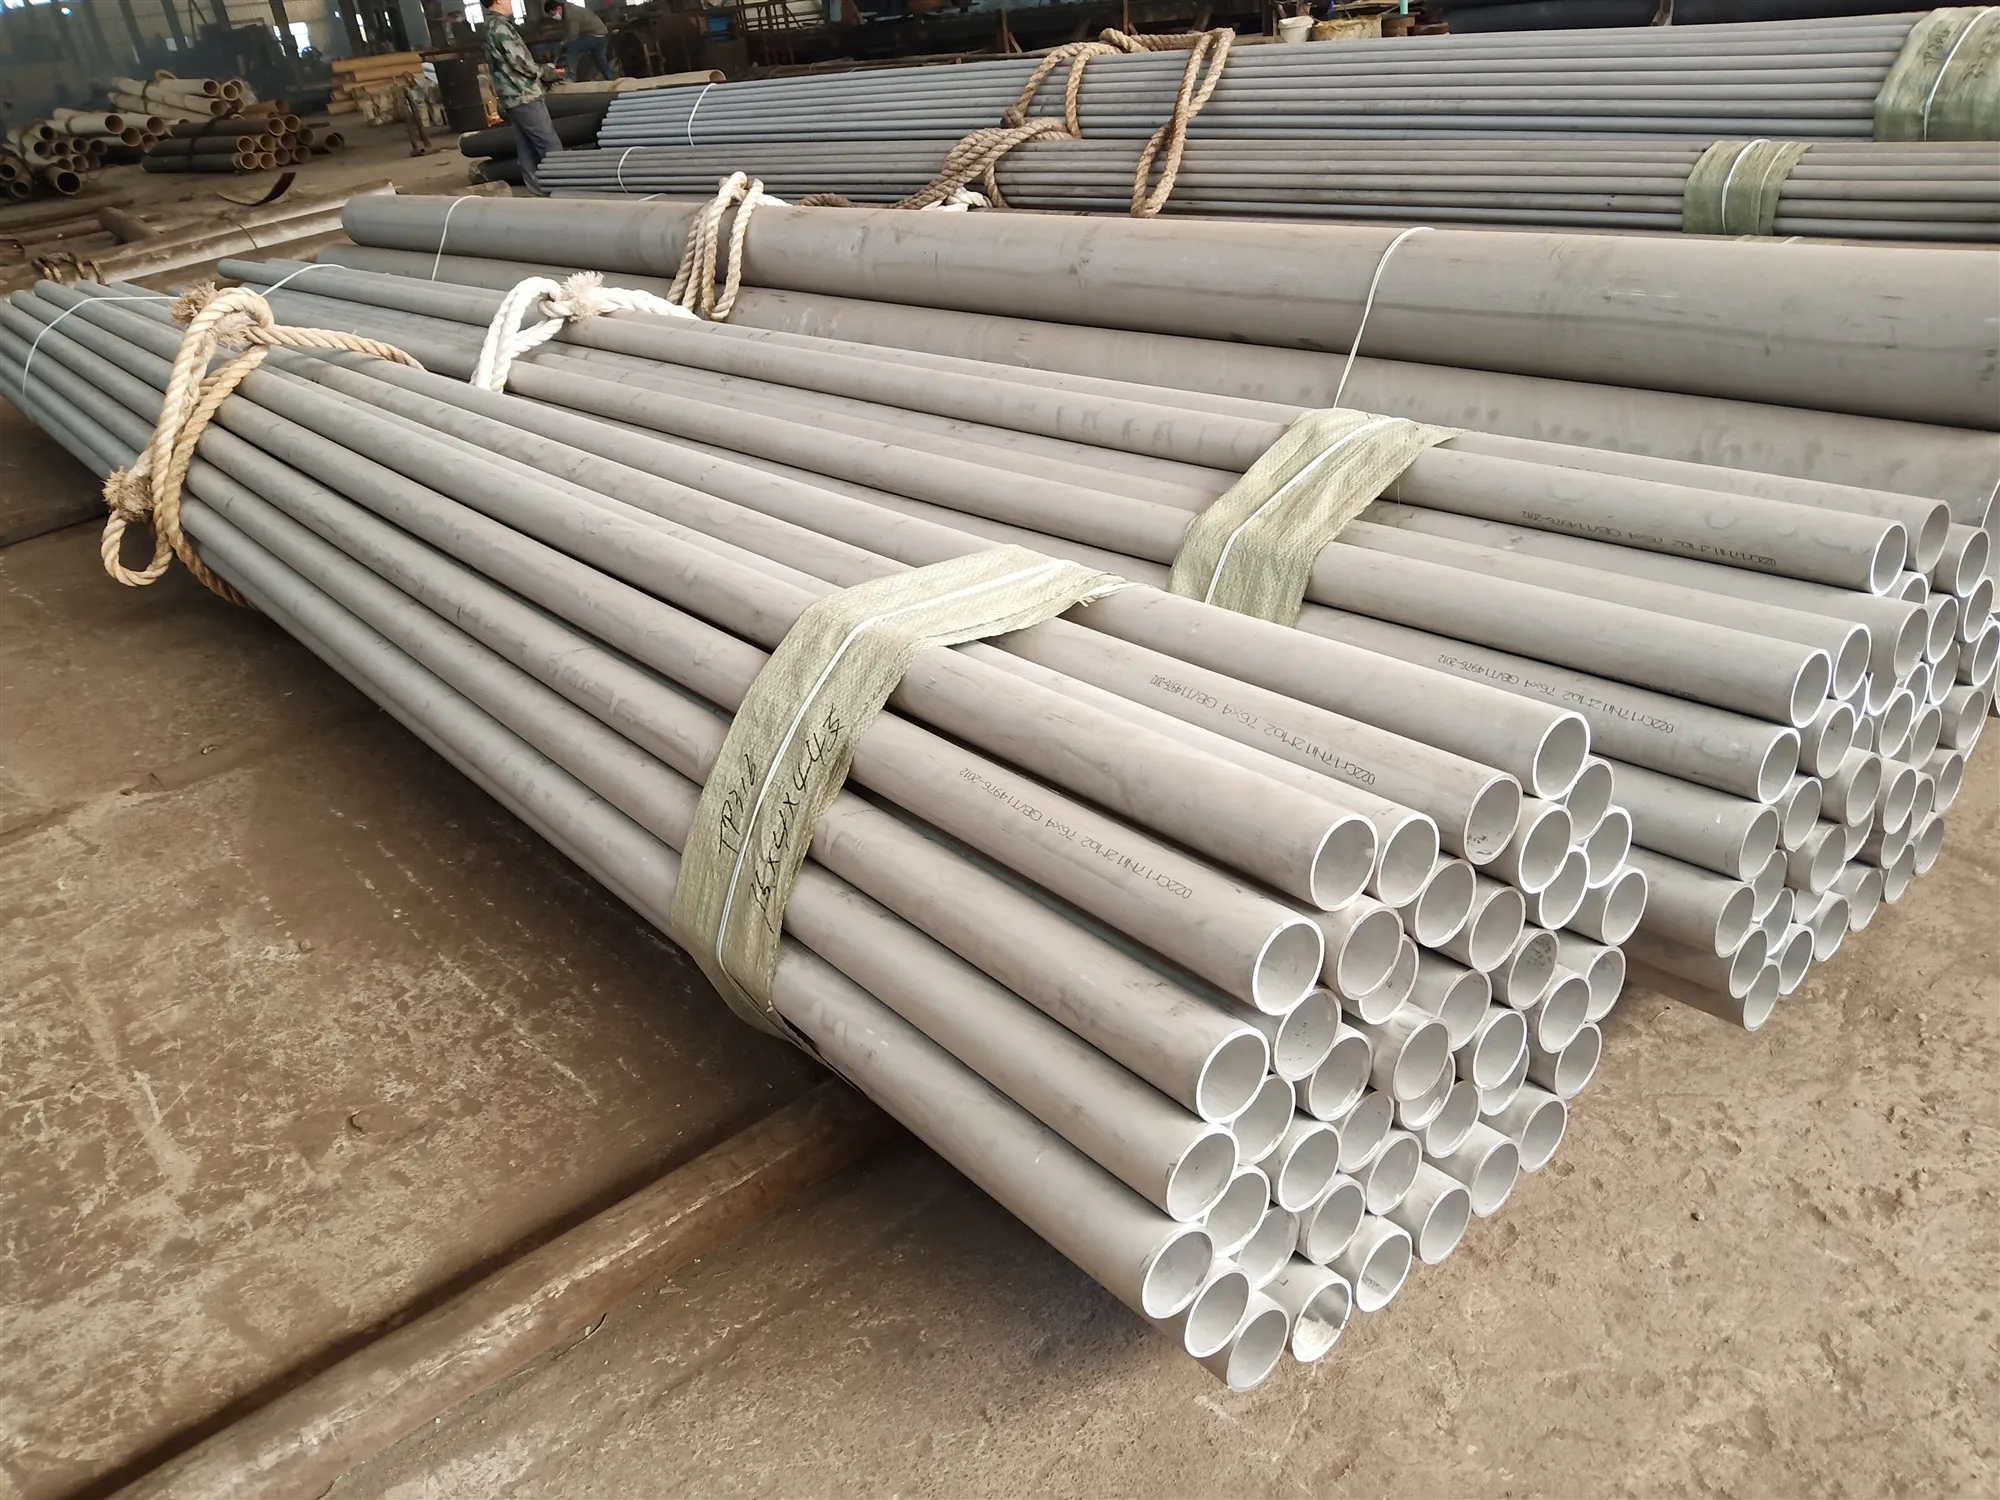 316 Stainless Steel Pipe - Buy 316 Stainless Steel Pipe,304 Stainless